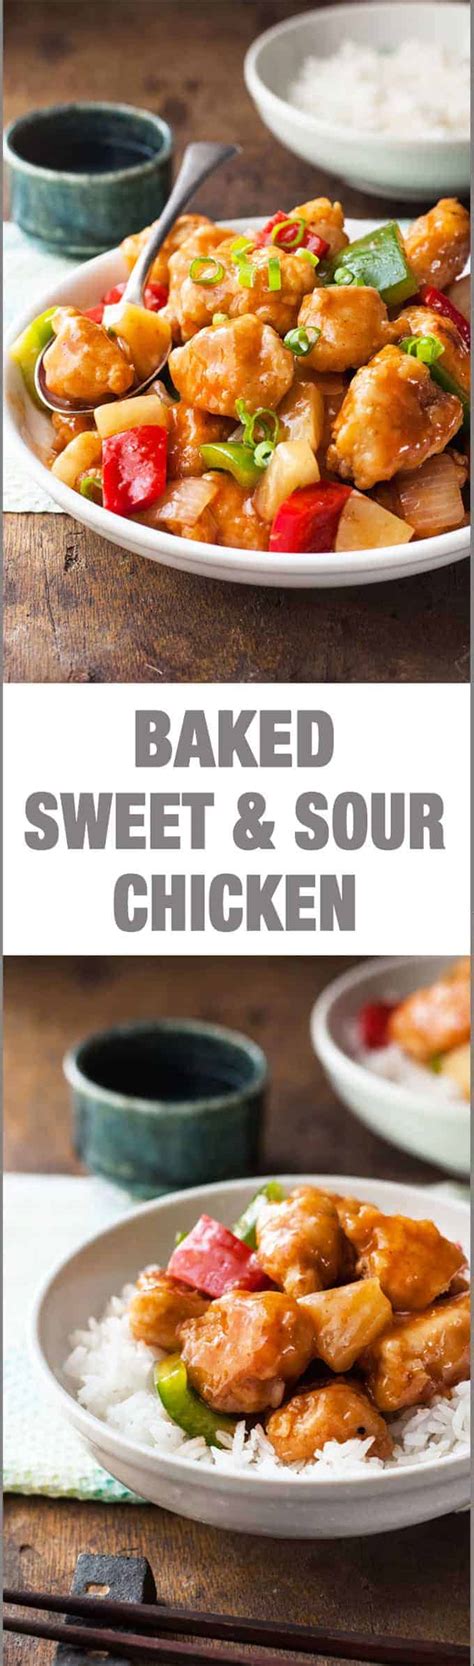 How to make sweet and sour chicken. Oven Baked Sweet & Sour Chicken | RecipeTin Eats